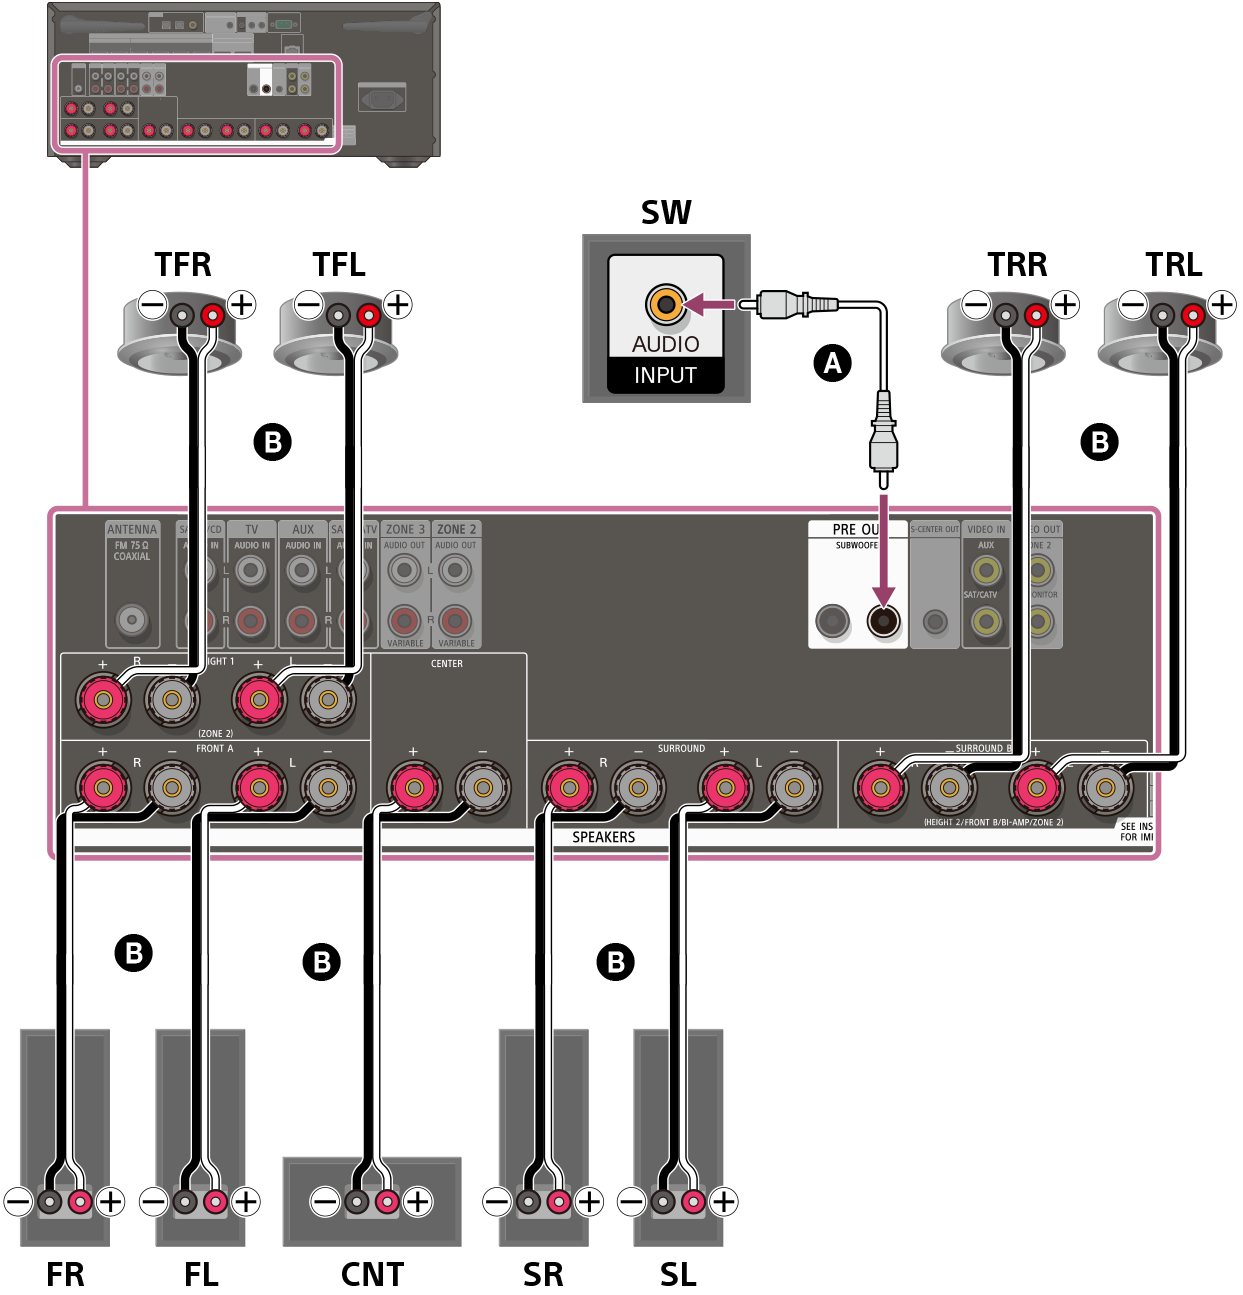 Illustration of connecting each speaker to the speaker terminals on the rear of the receiver. Connect the left and right front speakers, left and right surround speakers, center speaker, left and right top front speakers, and left and right top rear speakers to their respective speaker terminals using speaker cables (not supplied). Connect the subwoofer to the SUBWOOFER OUT terminal with a monaural audio cable (not supplied).